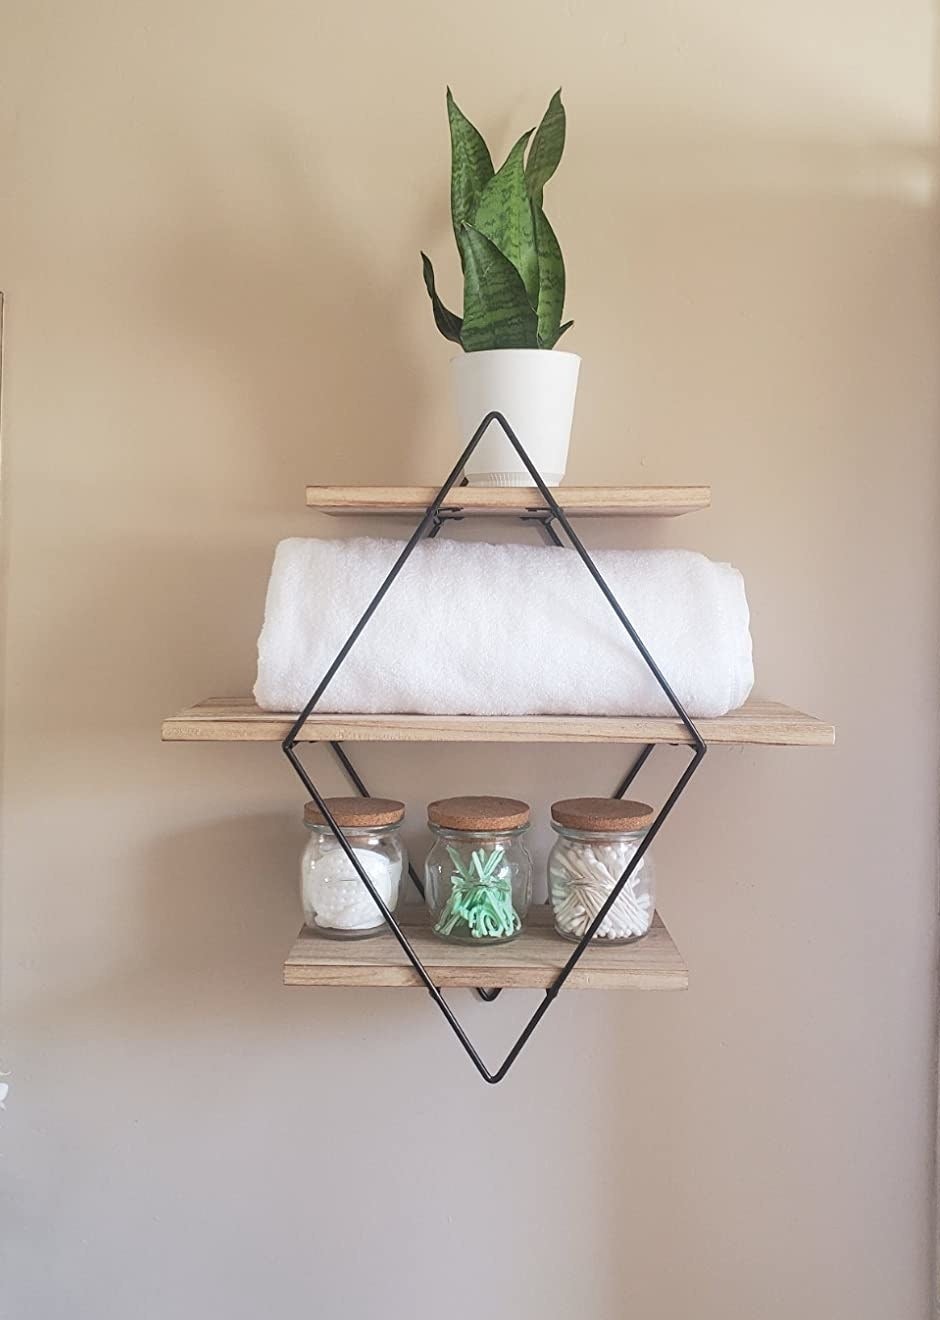 reviewer image of the natural Befayoo Diamond Floating Shelves mounted on a bathroom wall